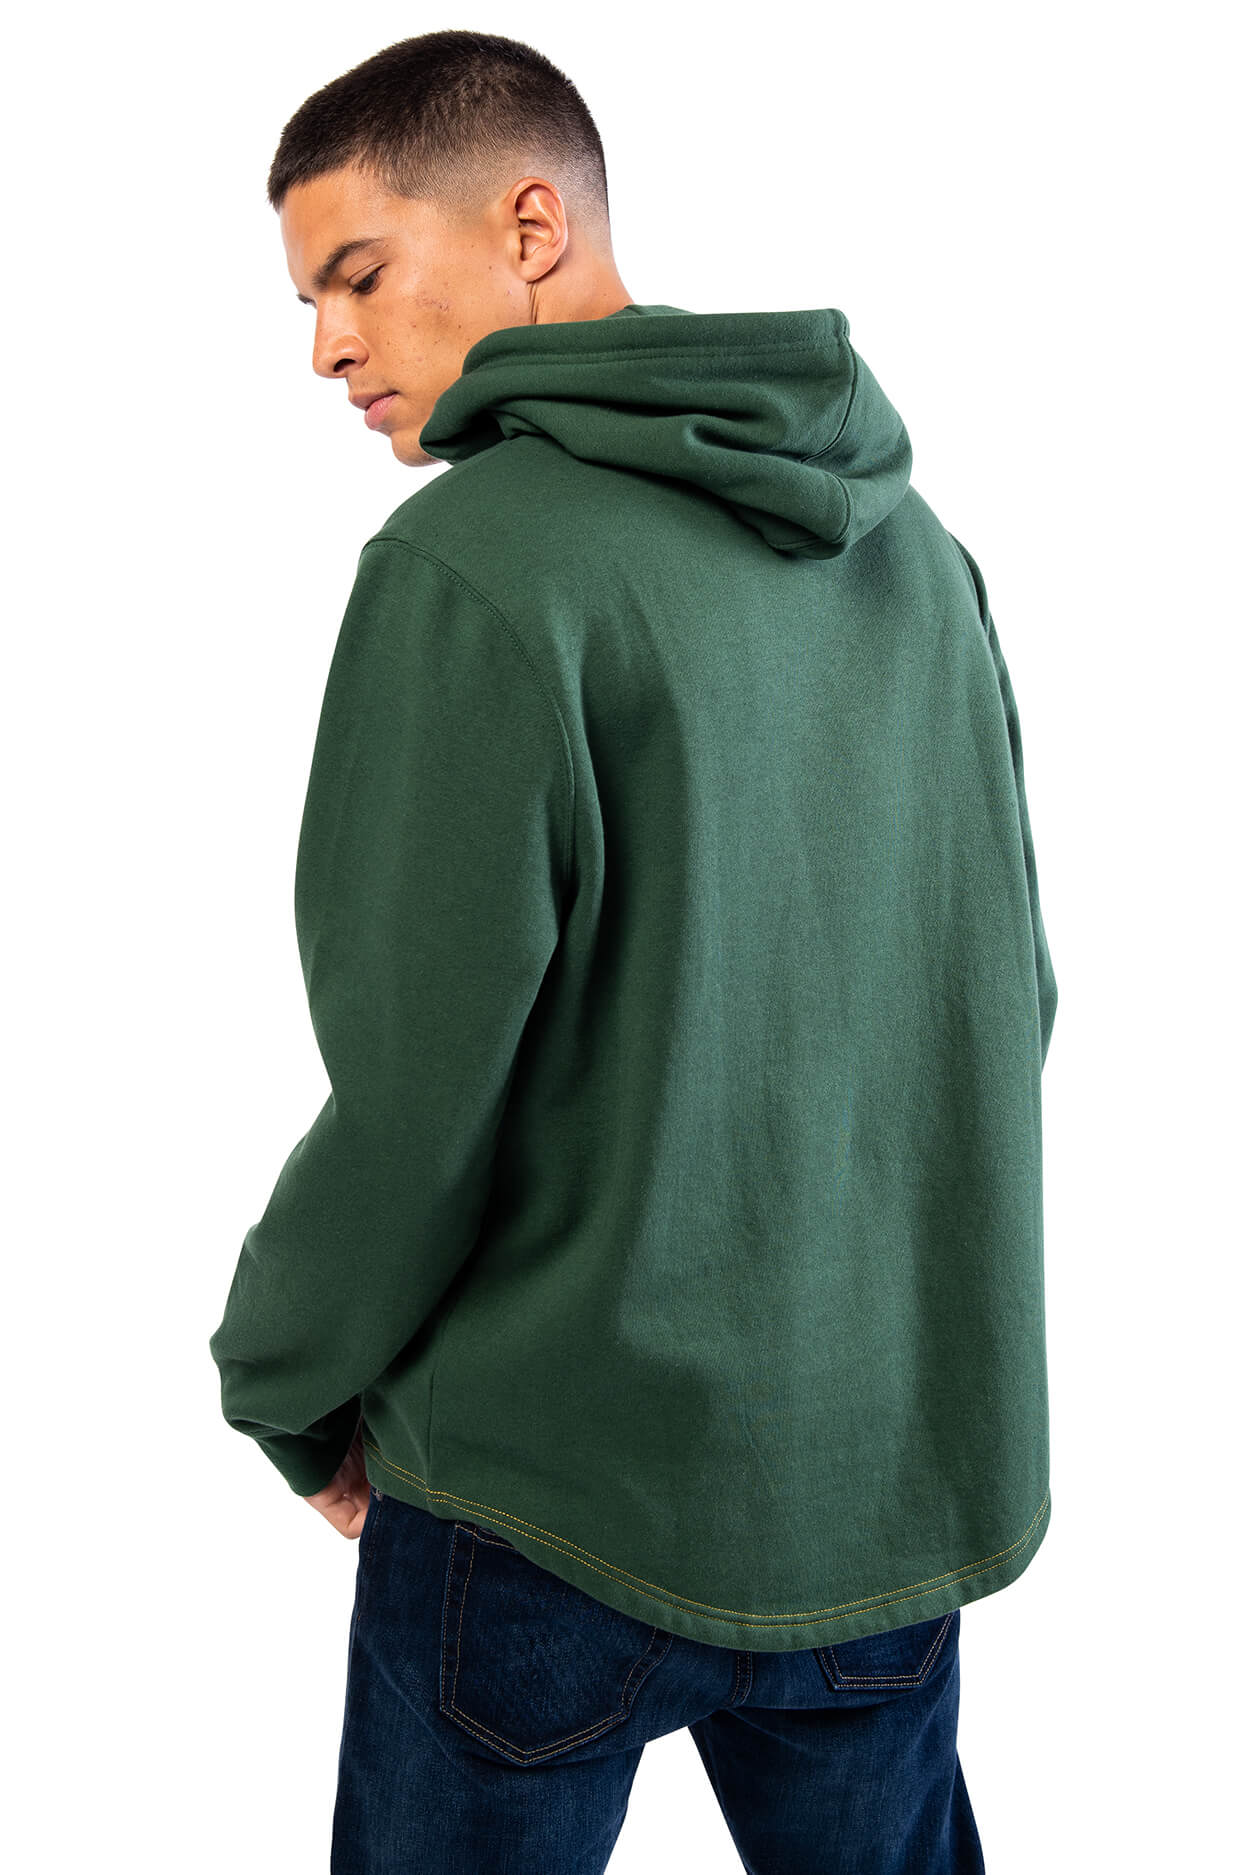 NFL Green Bay Packers Men's Embroidered Hoodie|Green Bay Packers